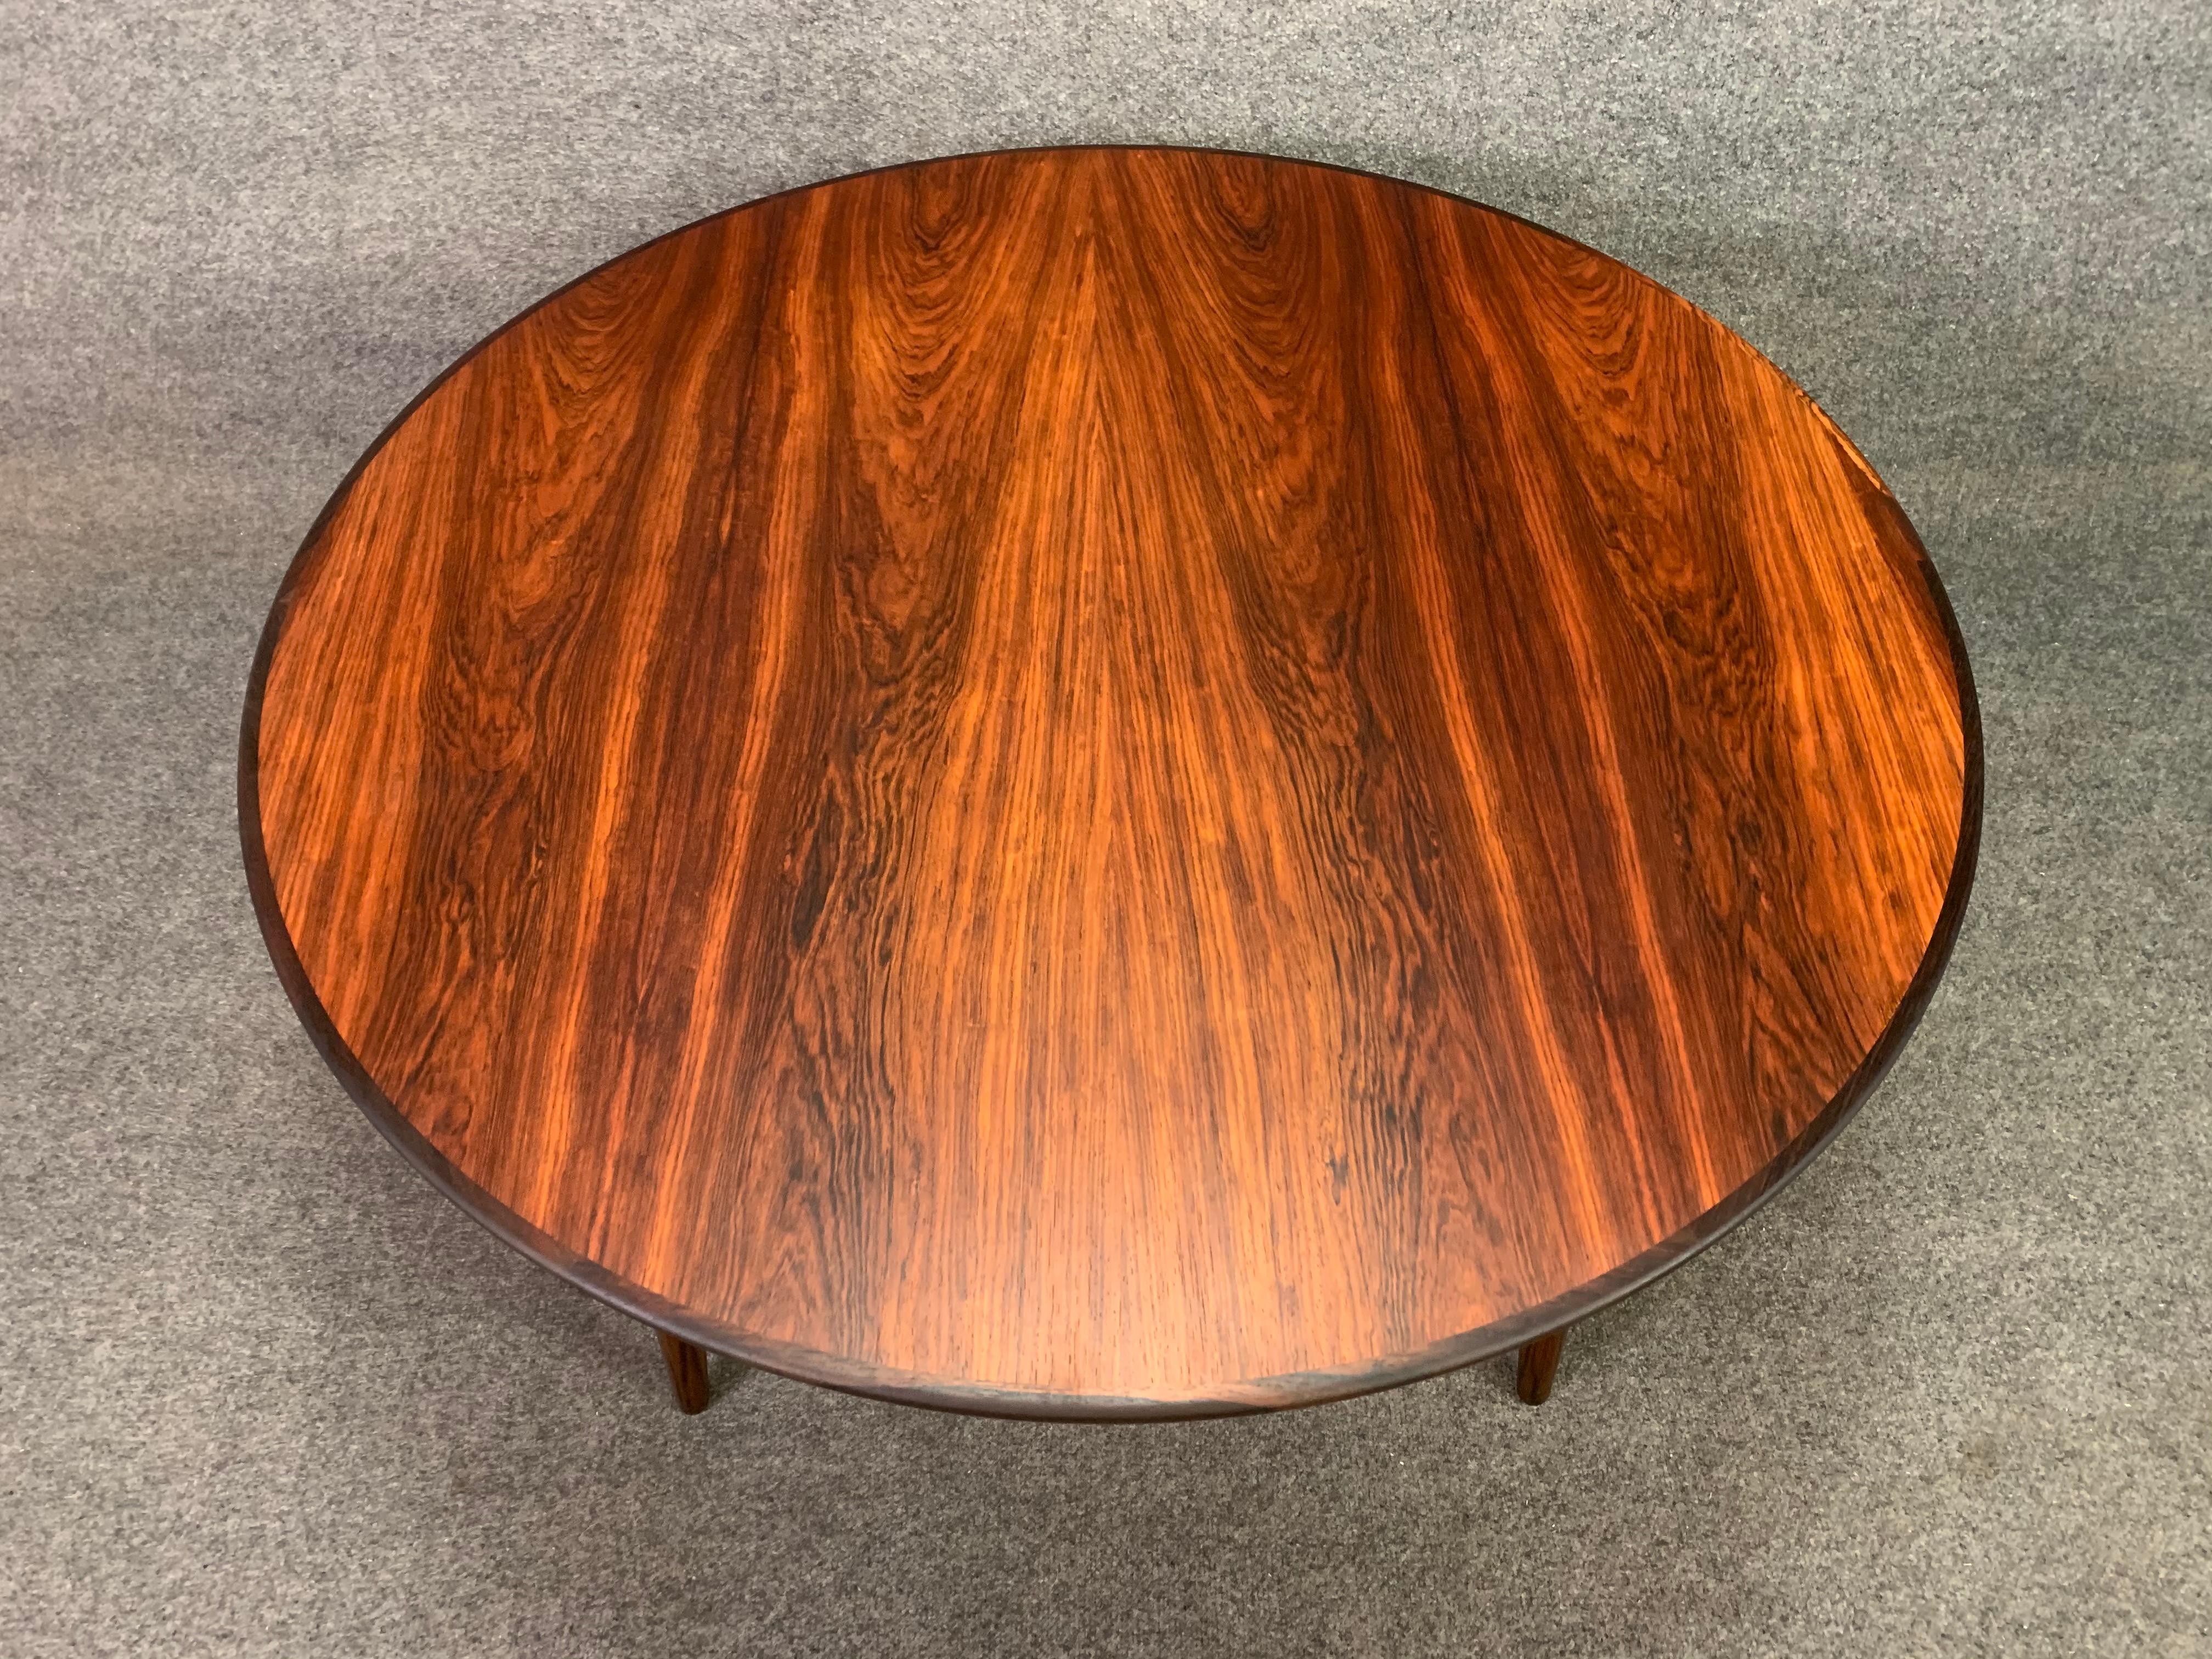 Here is a beautiful 1960s Scandinavian modern cocktail round table in rosewood reminiscent of the design of Johannes Andersen for CFC Mobelfabrik. This exquisite circular table has been fully refinished and features a vibrant rosewood grain on its